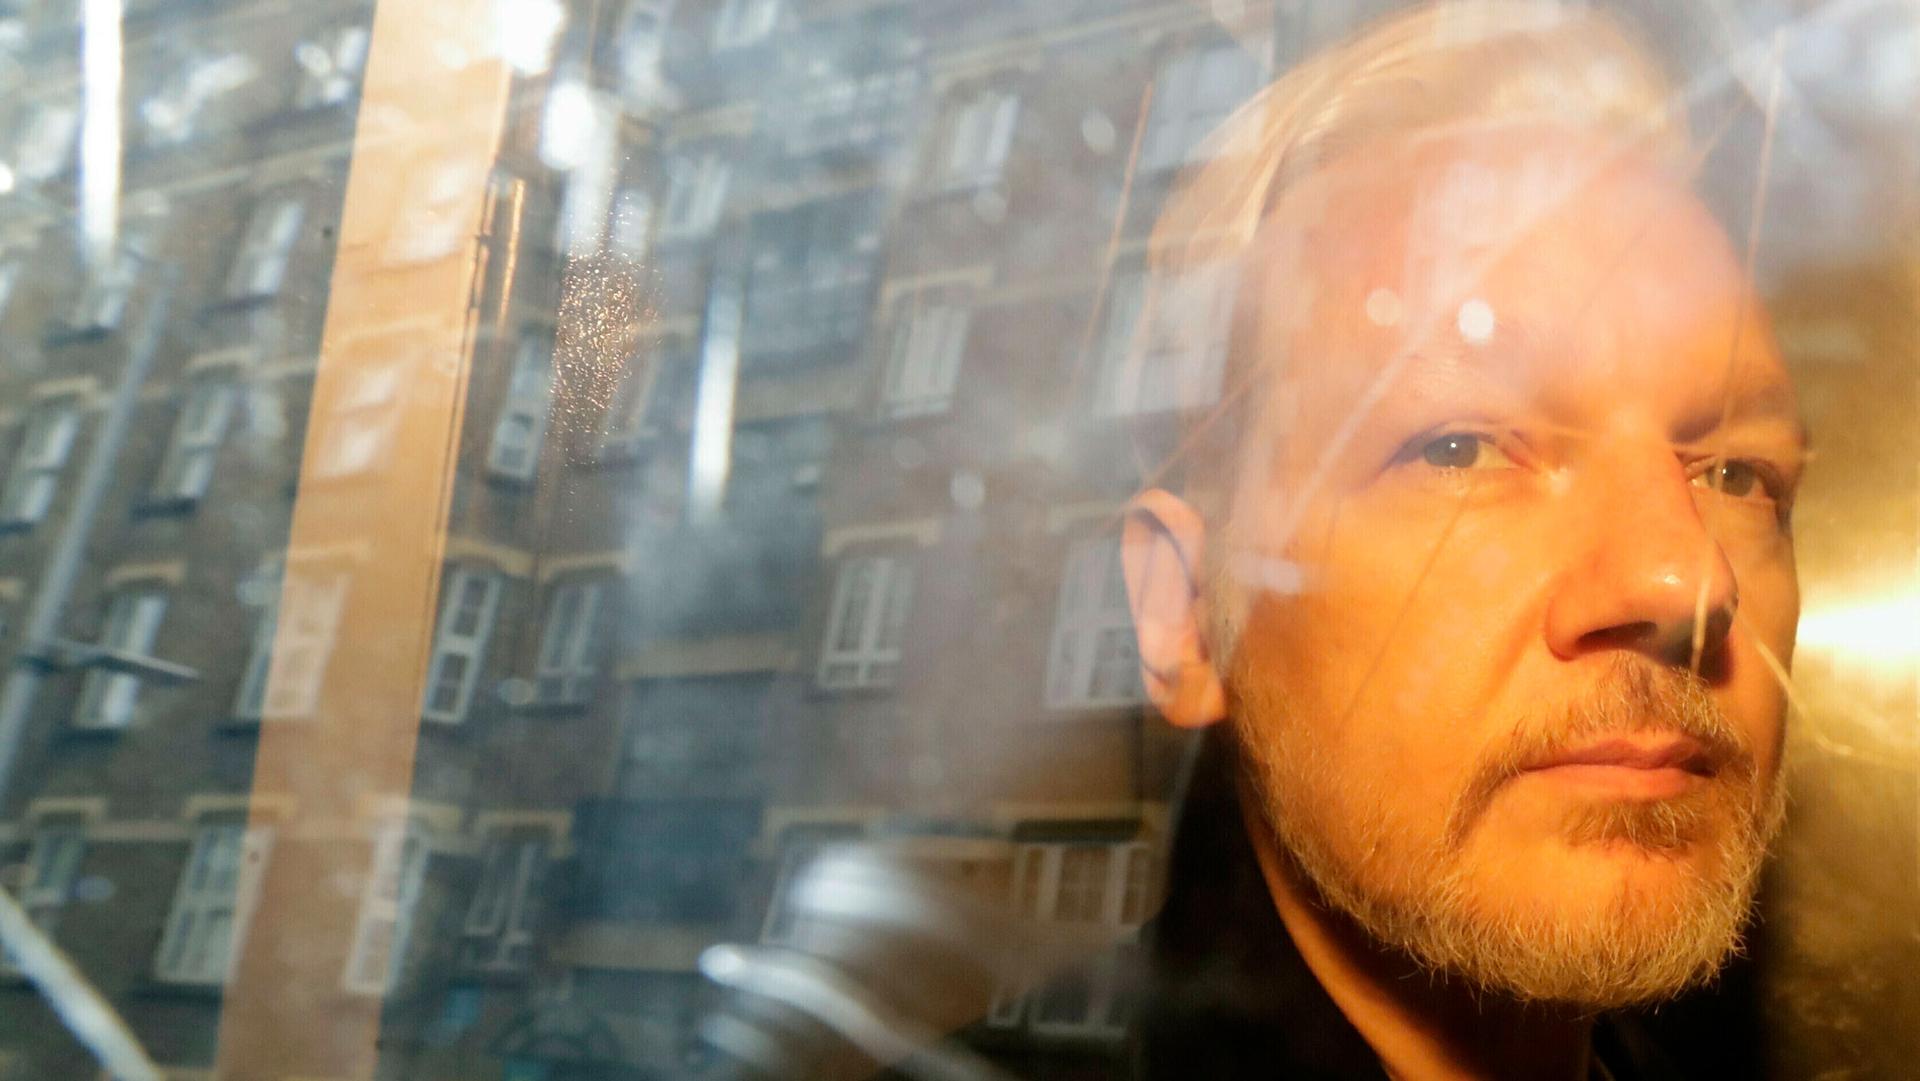 WikiLeaks founder Julian Assange is shown through the glass of a car door with the reflection of buildings in the distance.